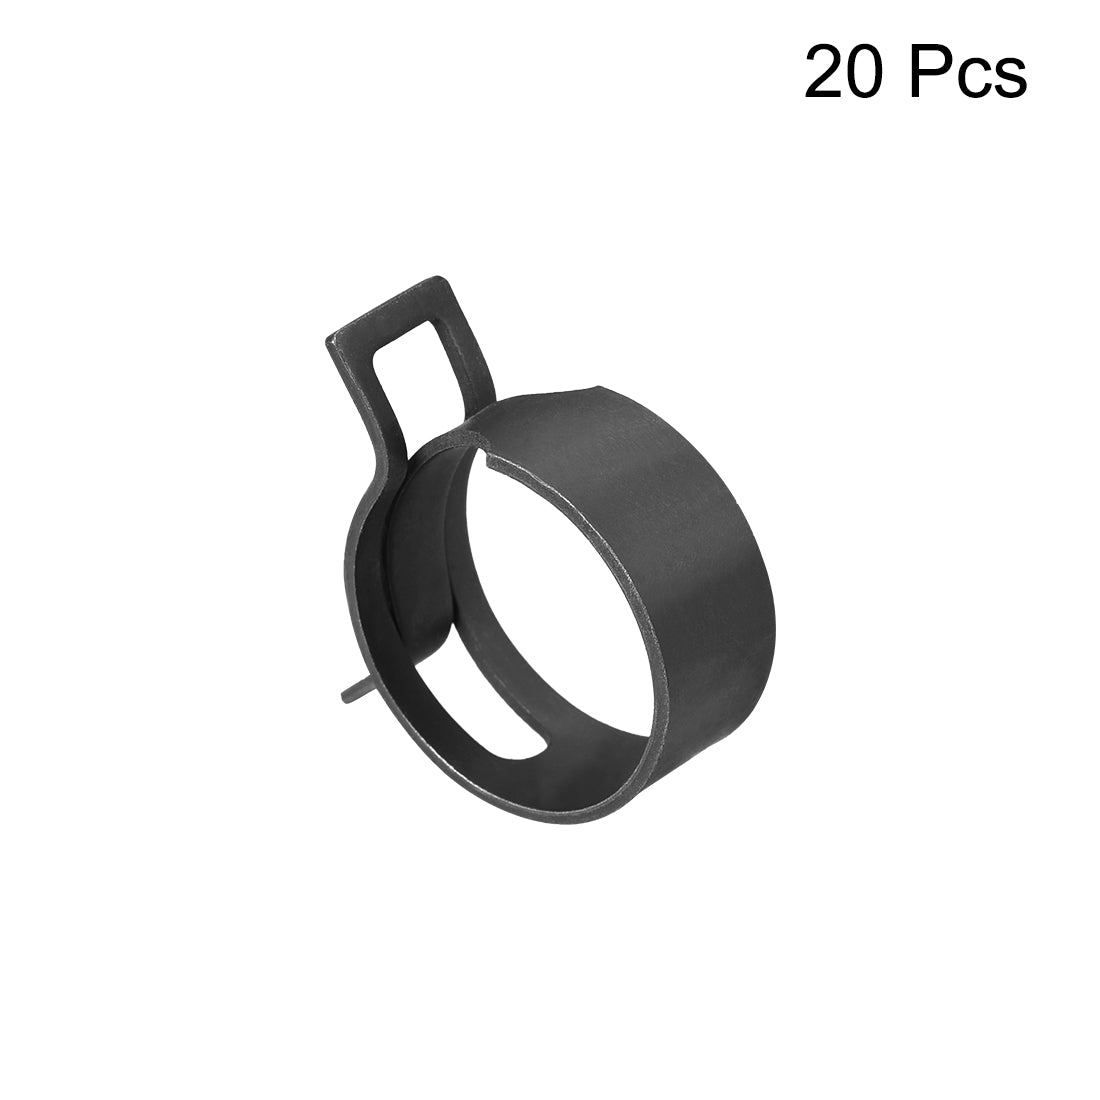 uxcell Uxcell Steel Band Clamp 25mm for Fuel Line Silicone Hose Tube Spring Clips Clamp Black Manganese Steel 20Pcs